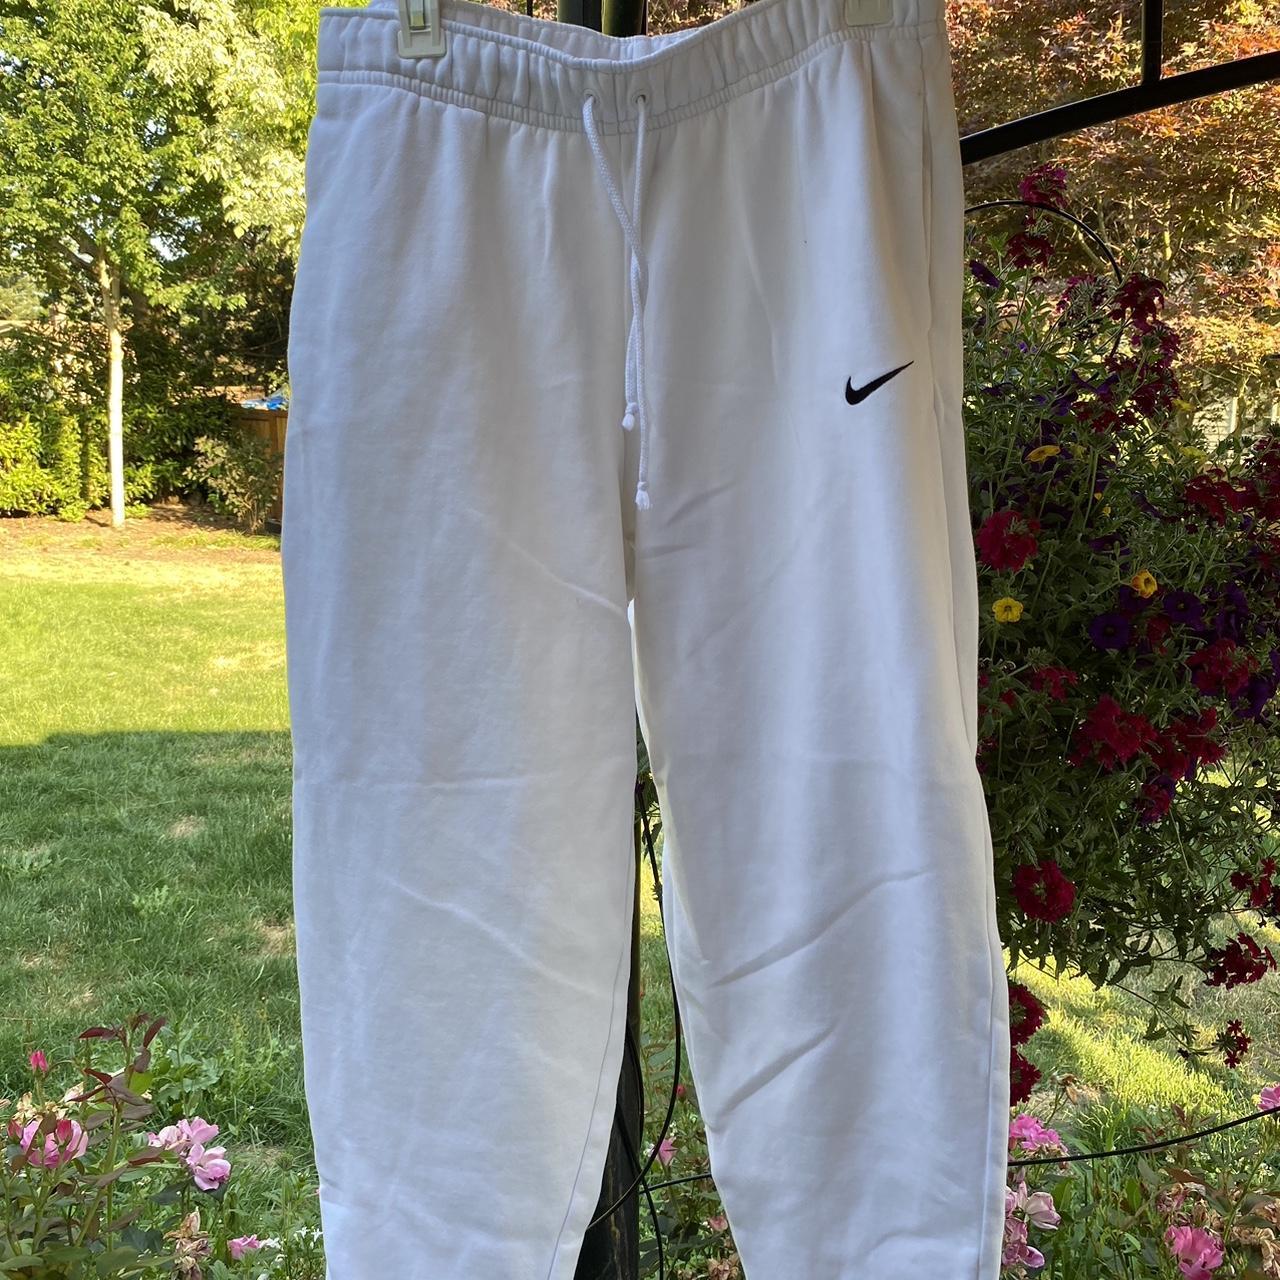 Nike white baggy sweatpants. Size M. Great condition